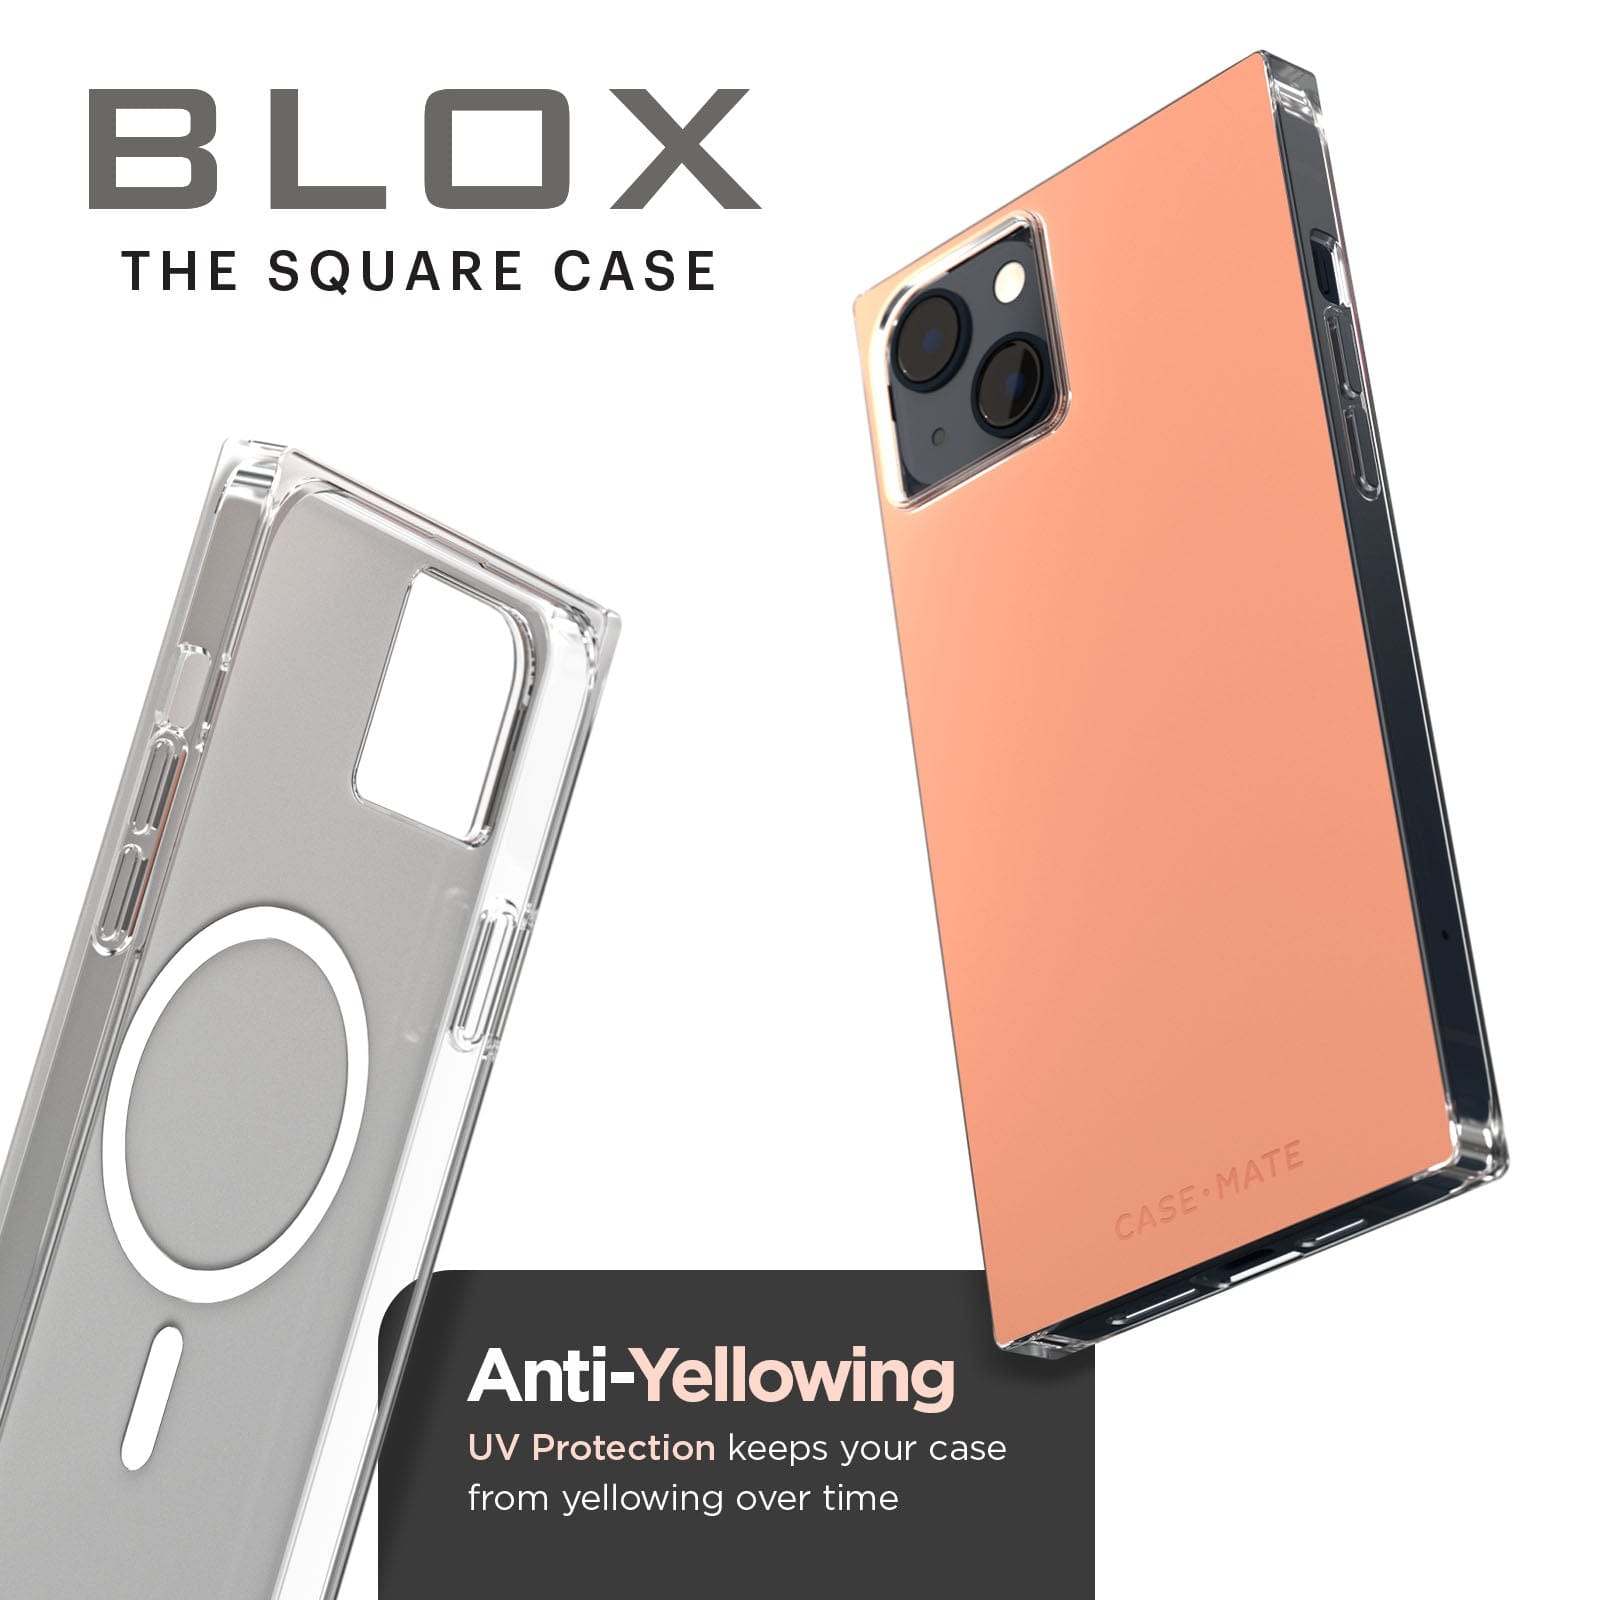 BLOX The square Case. Anti-yellowing UV protection keeps your case from yellowing over time. color::Clay Pink